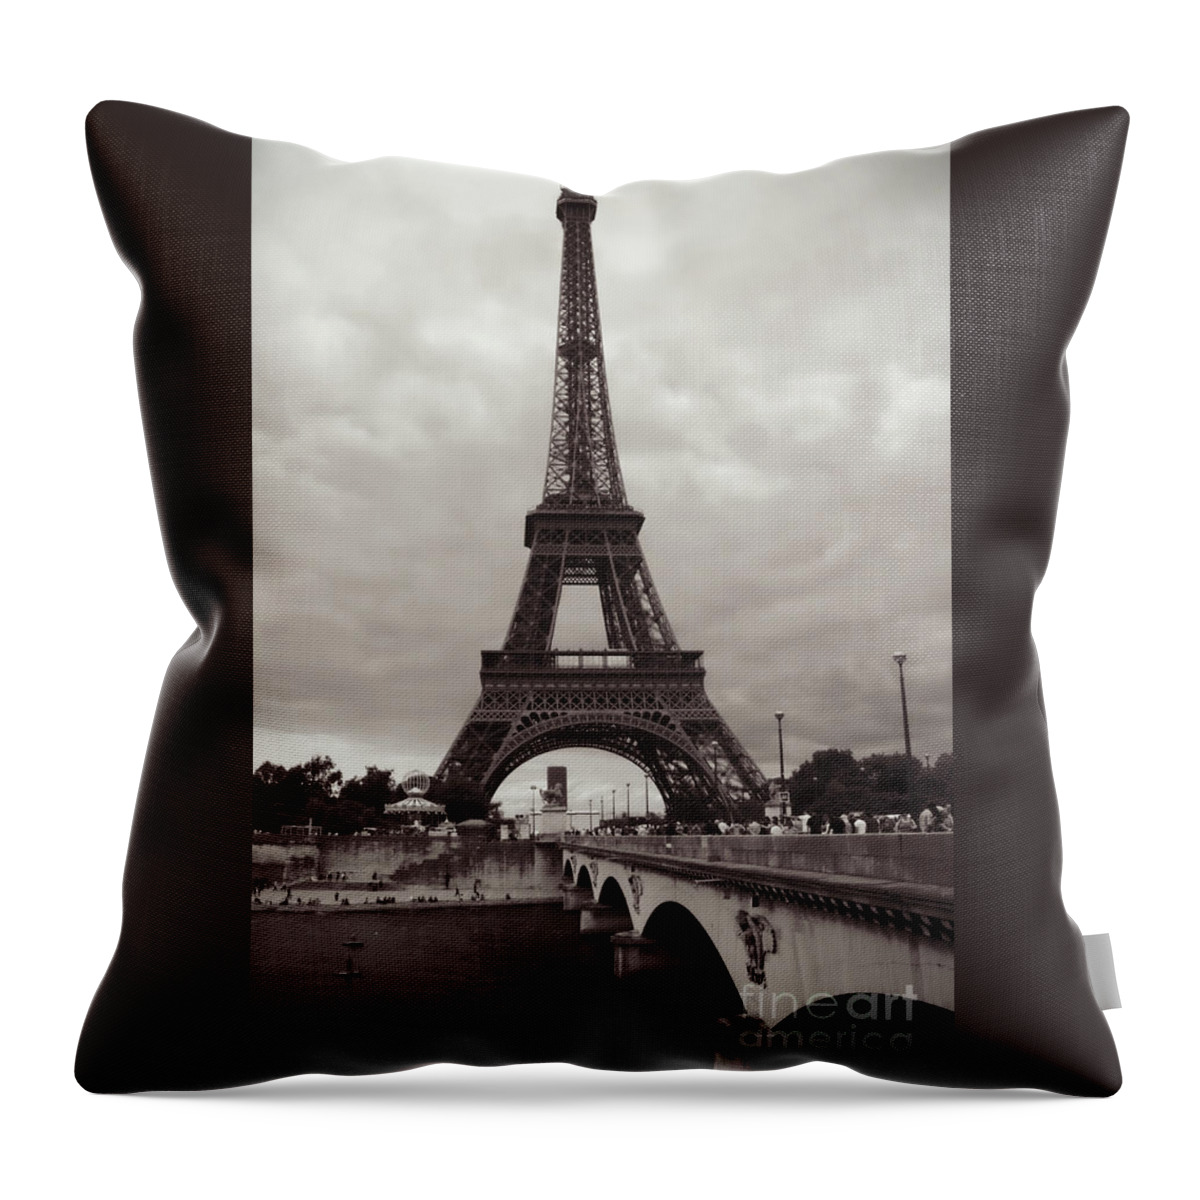 Architecture Throw Pillow featuring the photograph Eiffel Tower with Bridge in Sepia by Carol Groenen